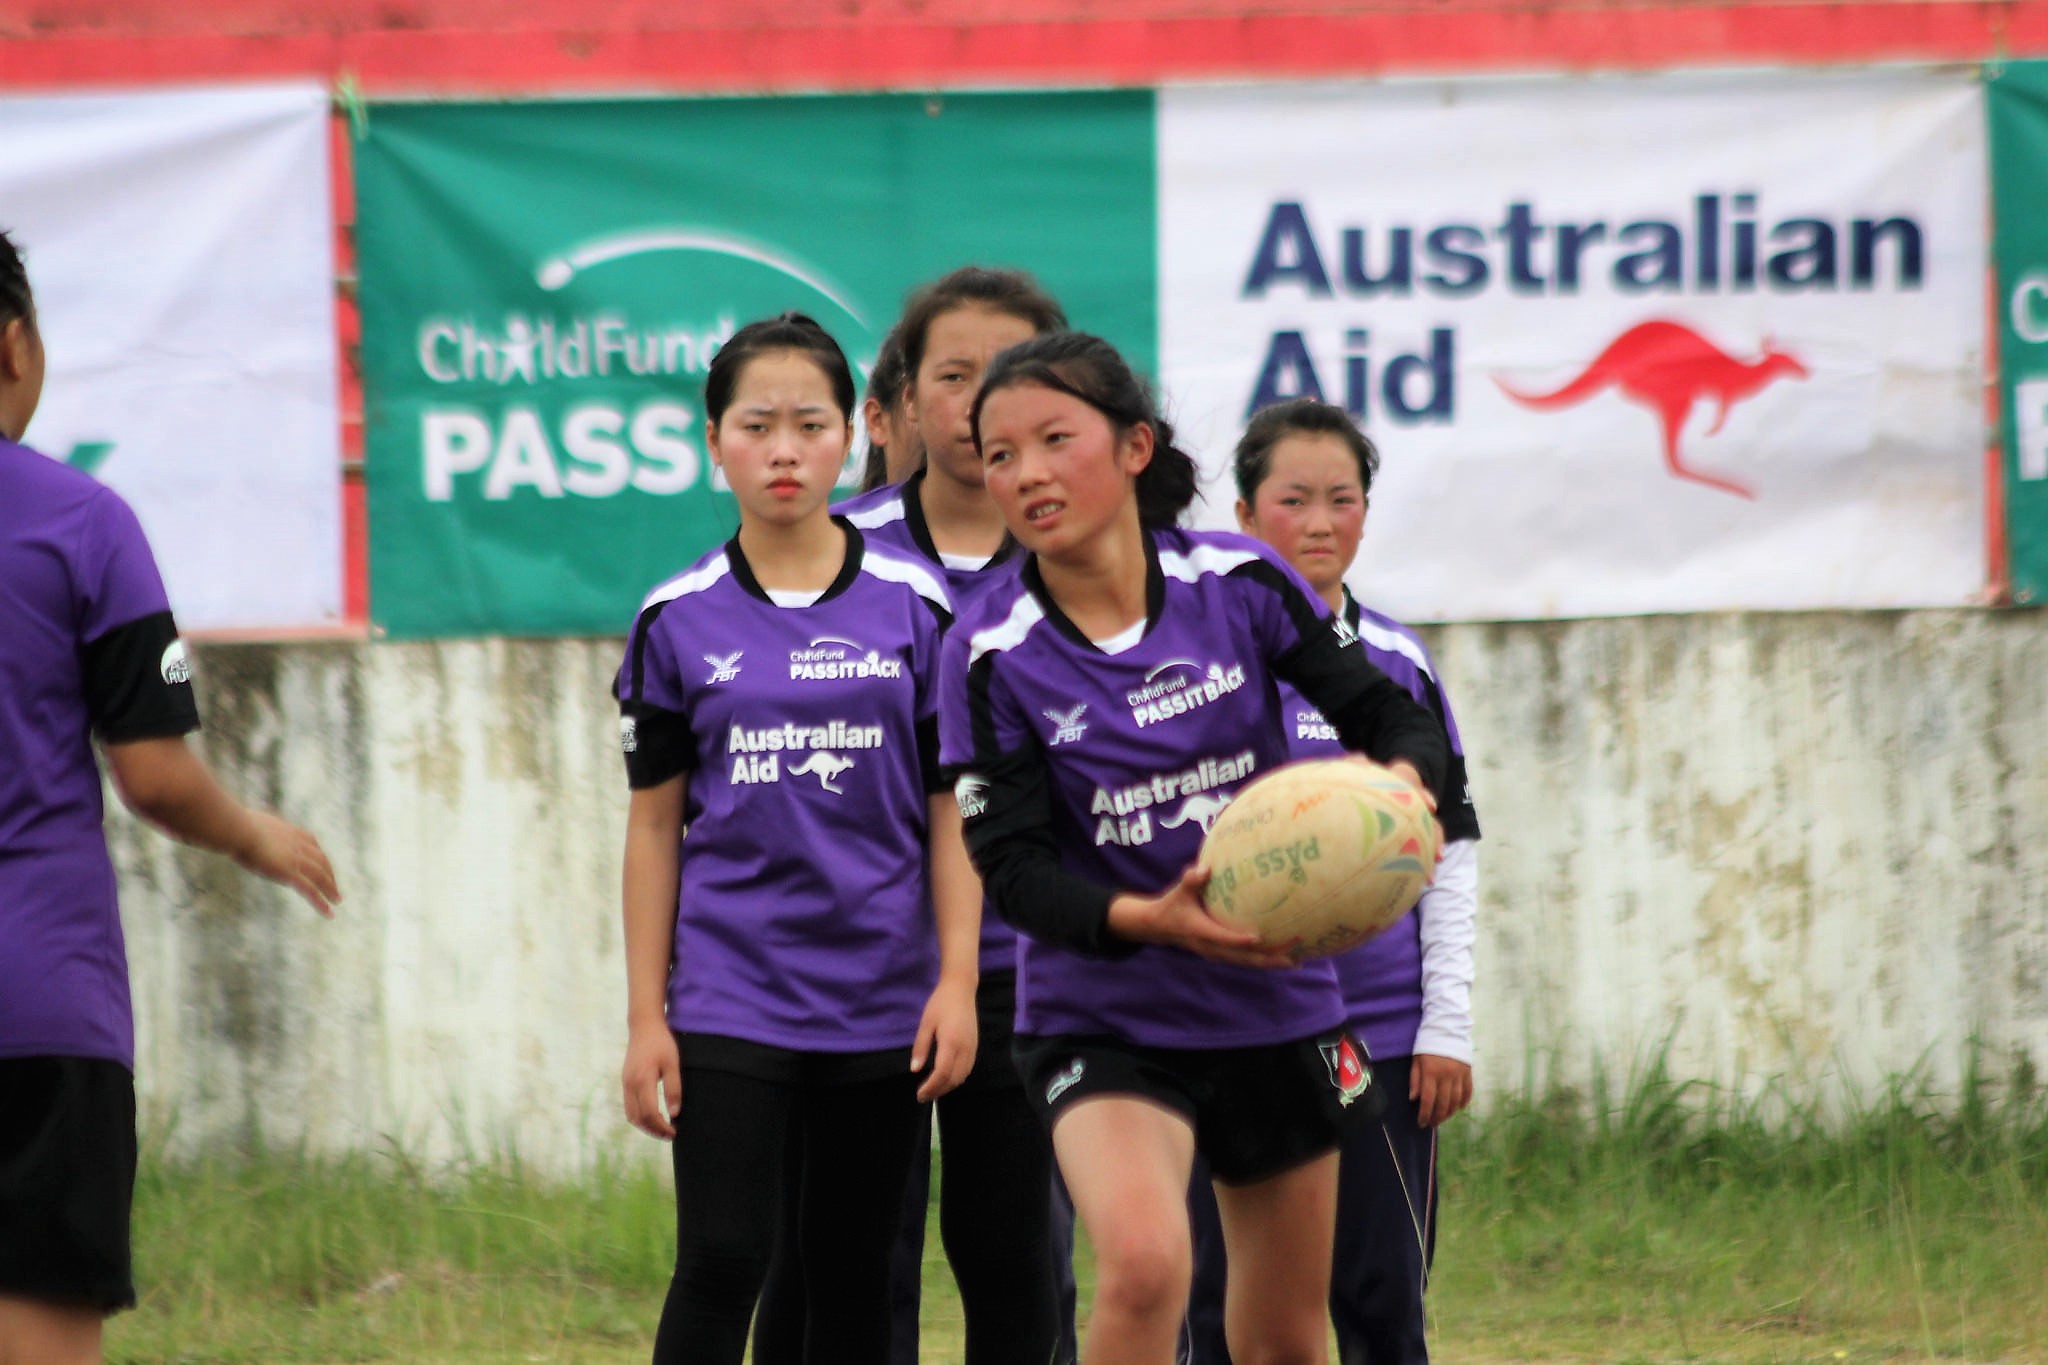 Lar runs with rugby ball while her team mates watch